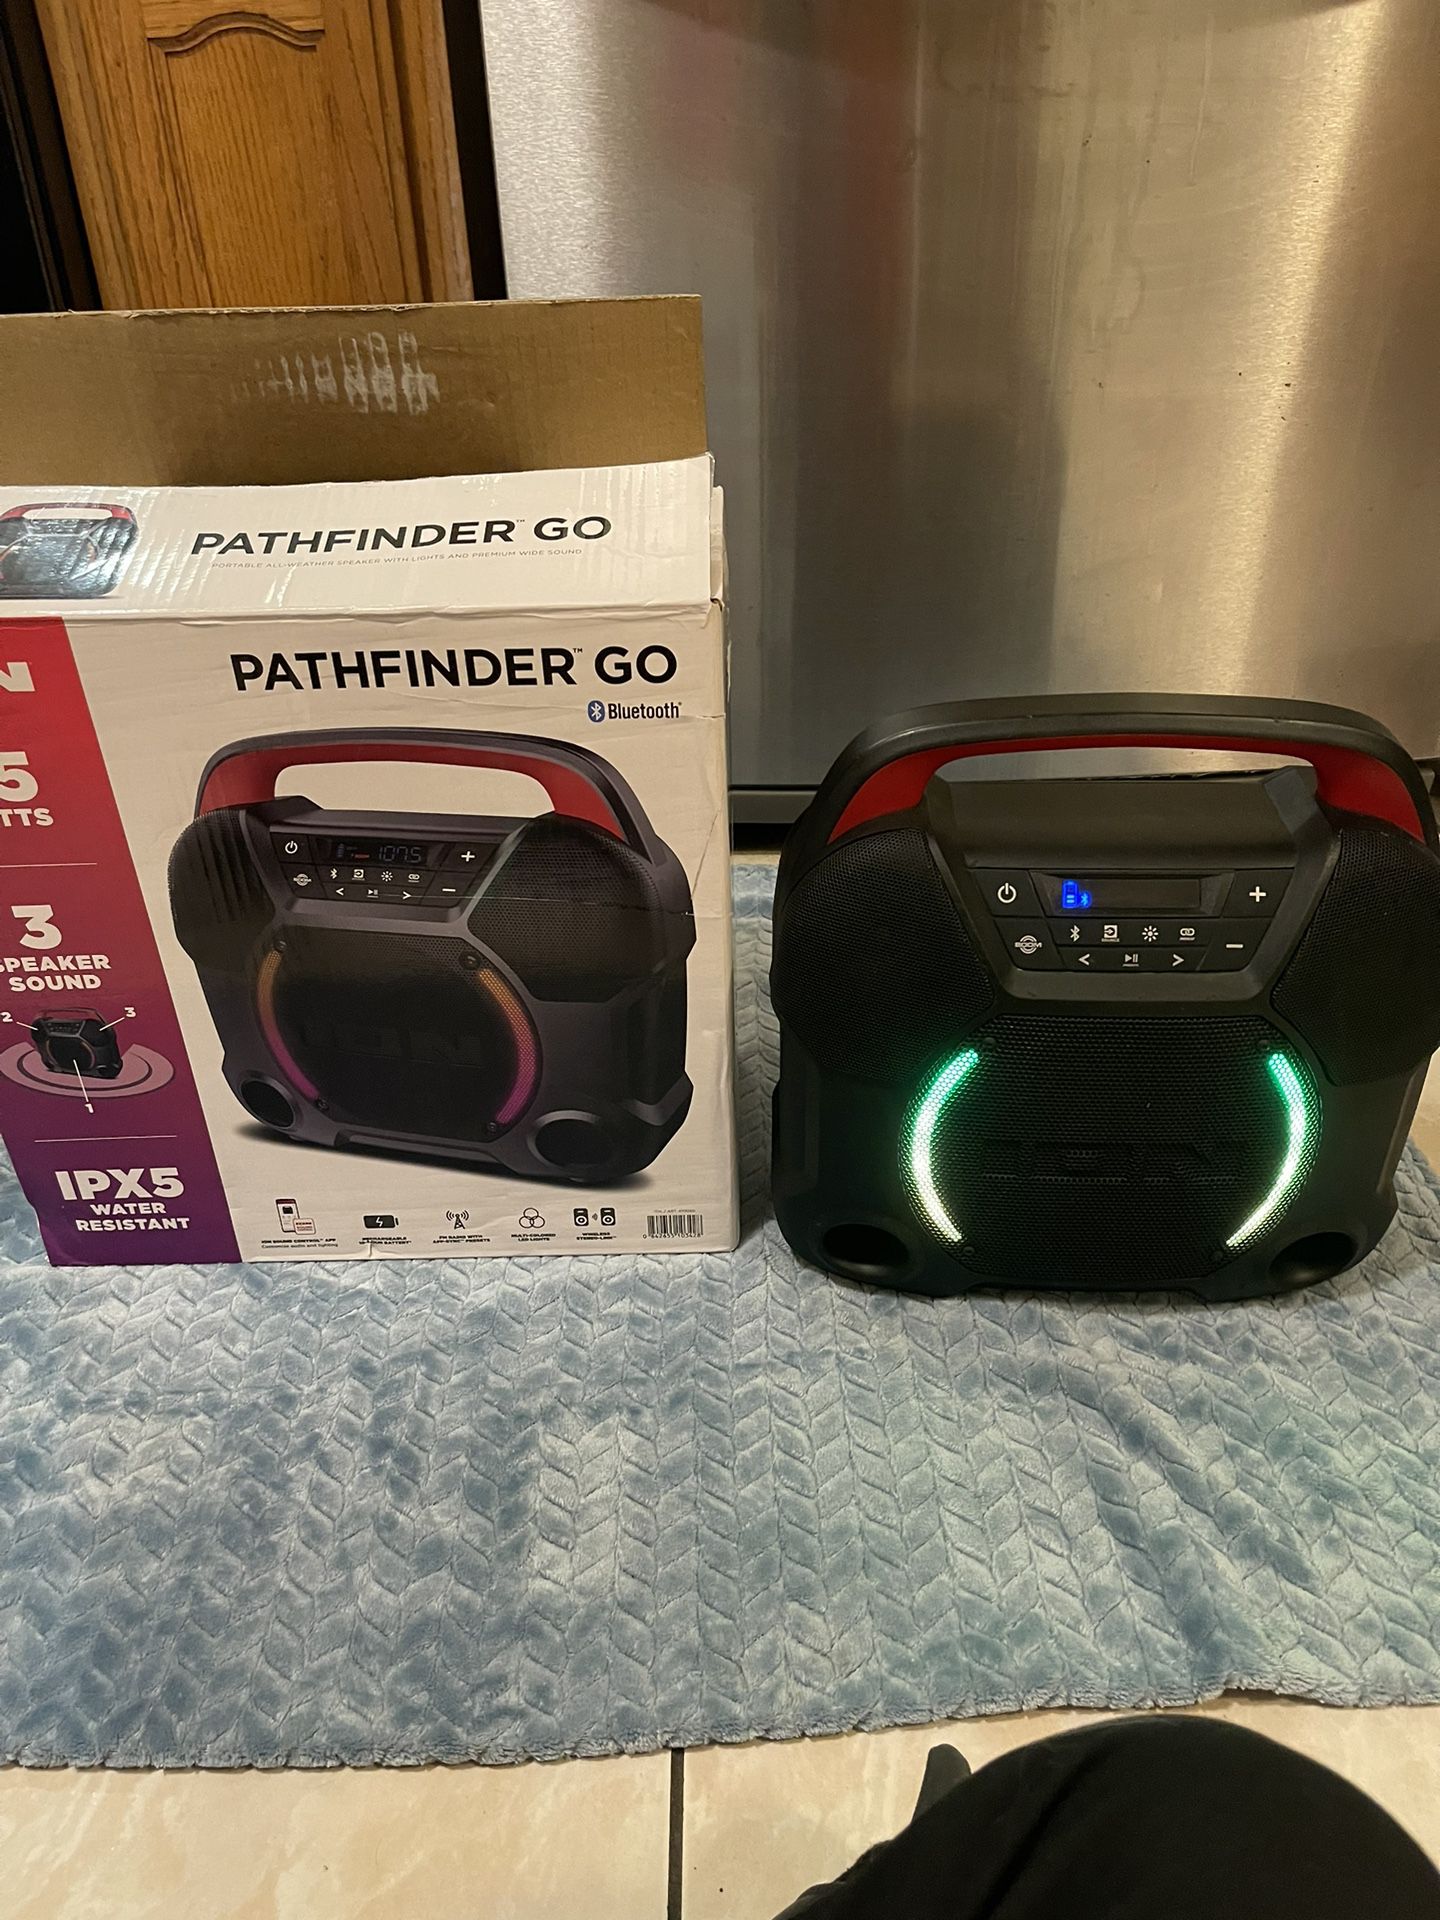 ION Audio Pathfinder Go Portable Bluetooth 3 Rechargeable Speaker w/ Pulse LED Lights